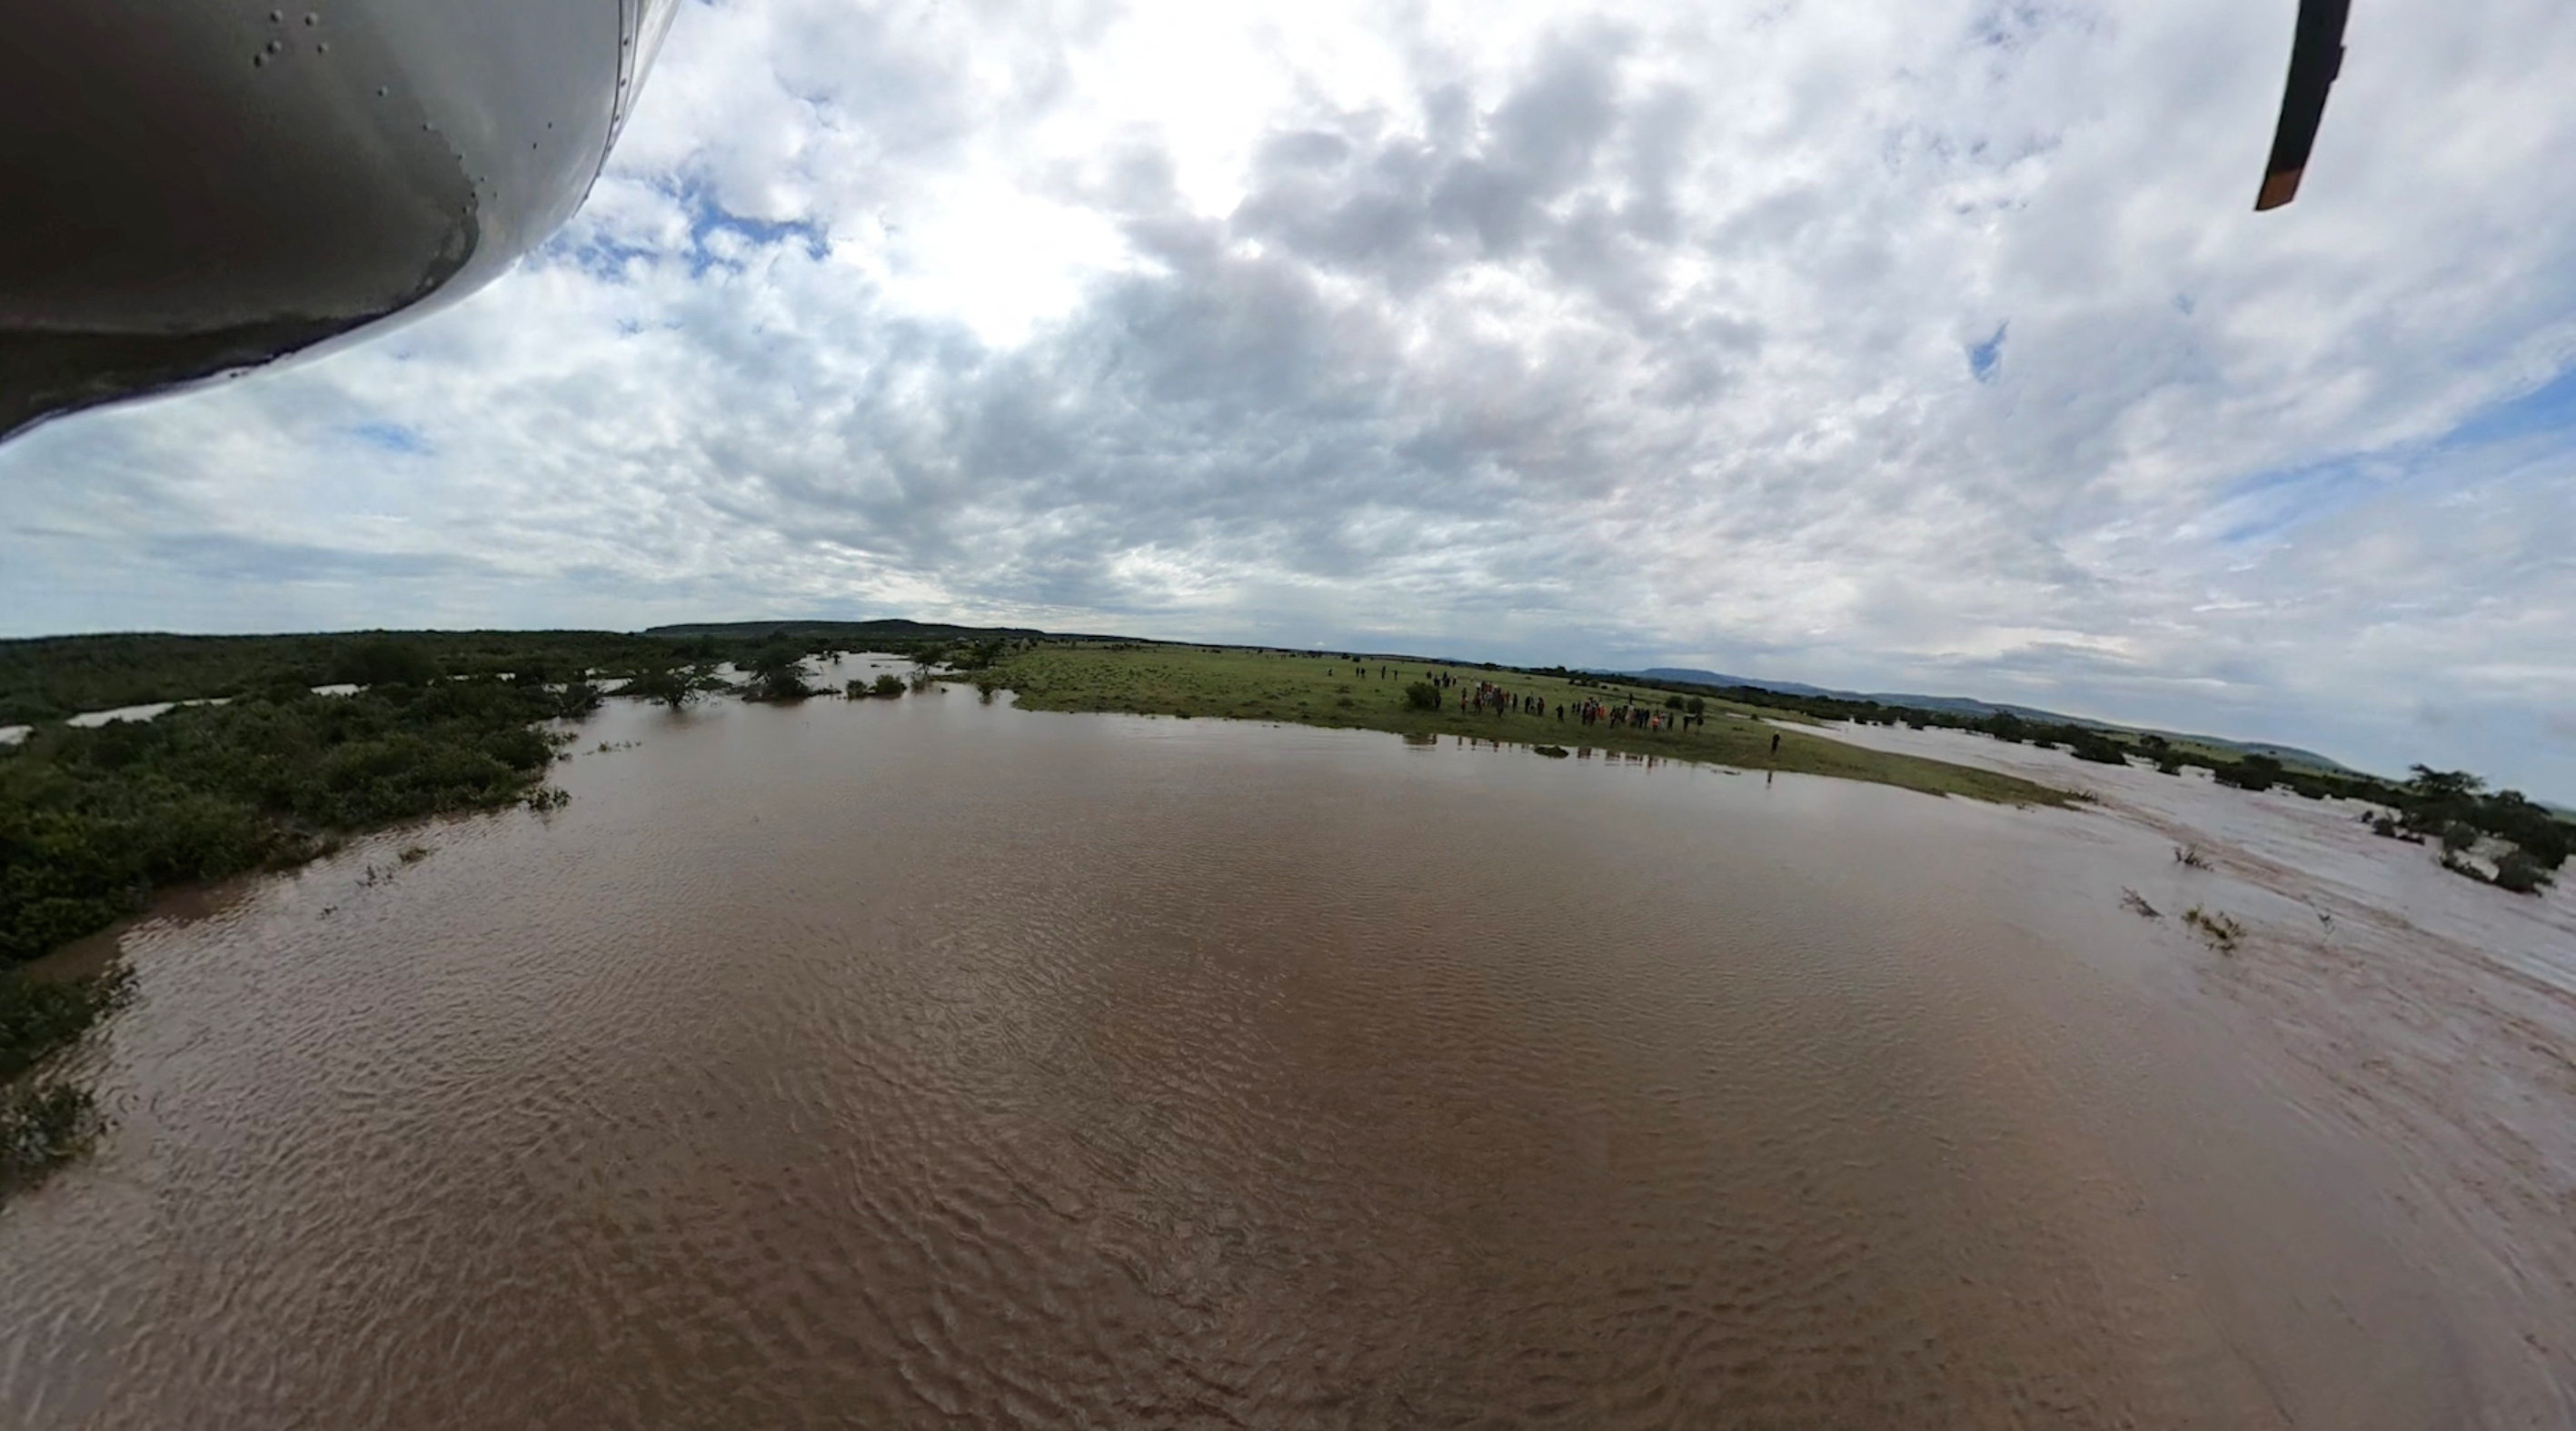 A view from a helicopter shows a swollen river within the flooded area following heavy rainfall in the Talek region, of the Maasai Mara